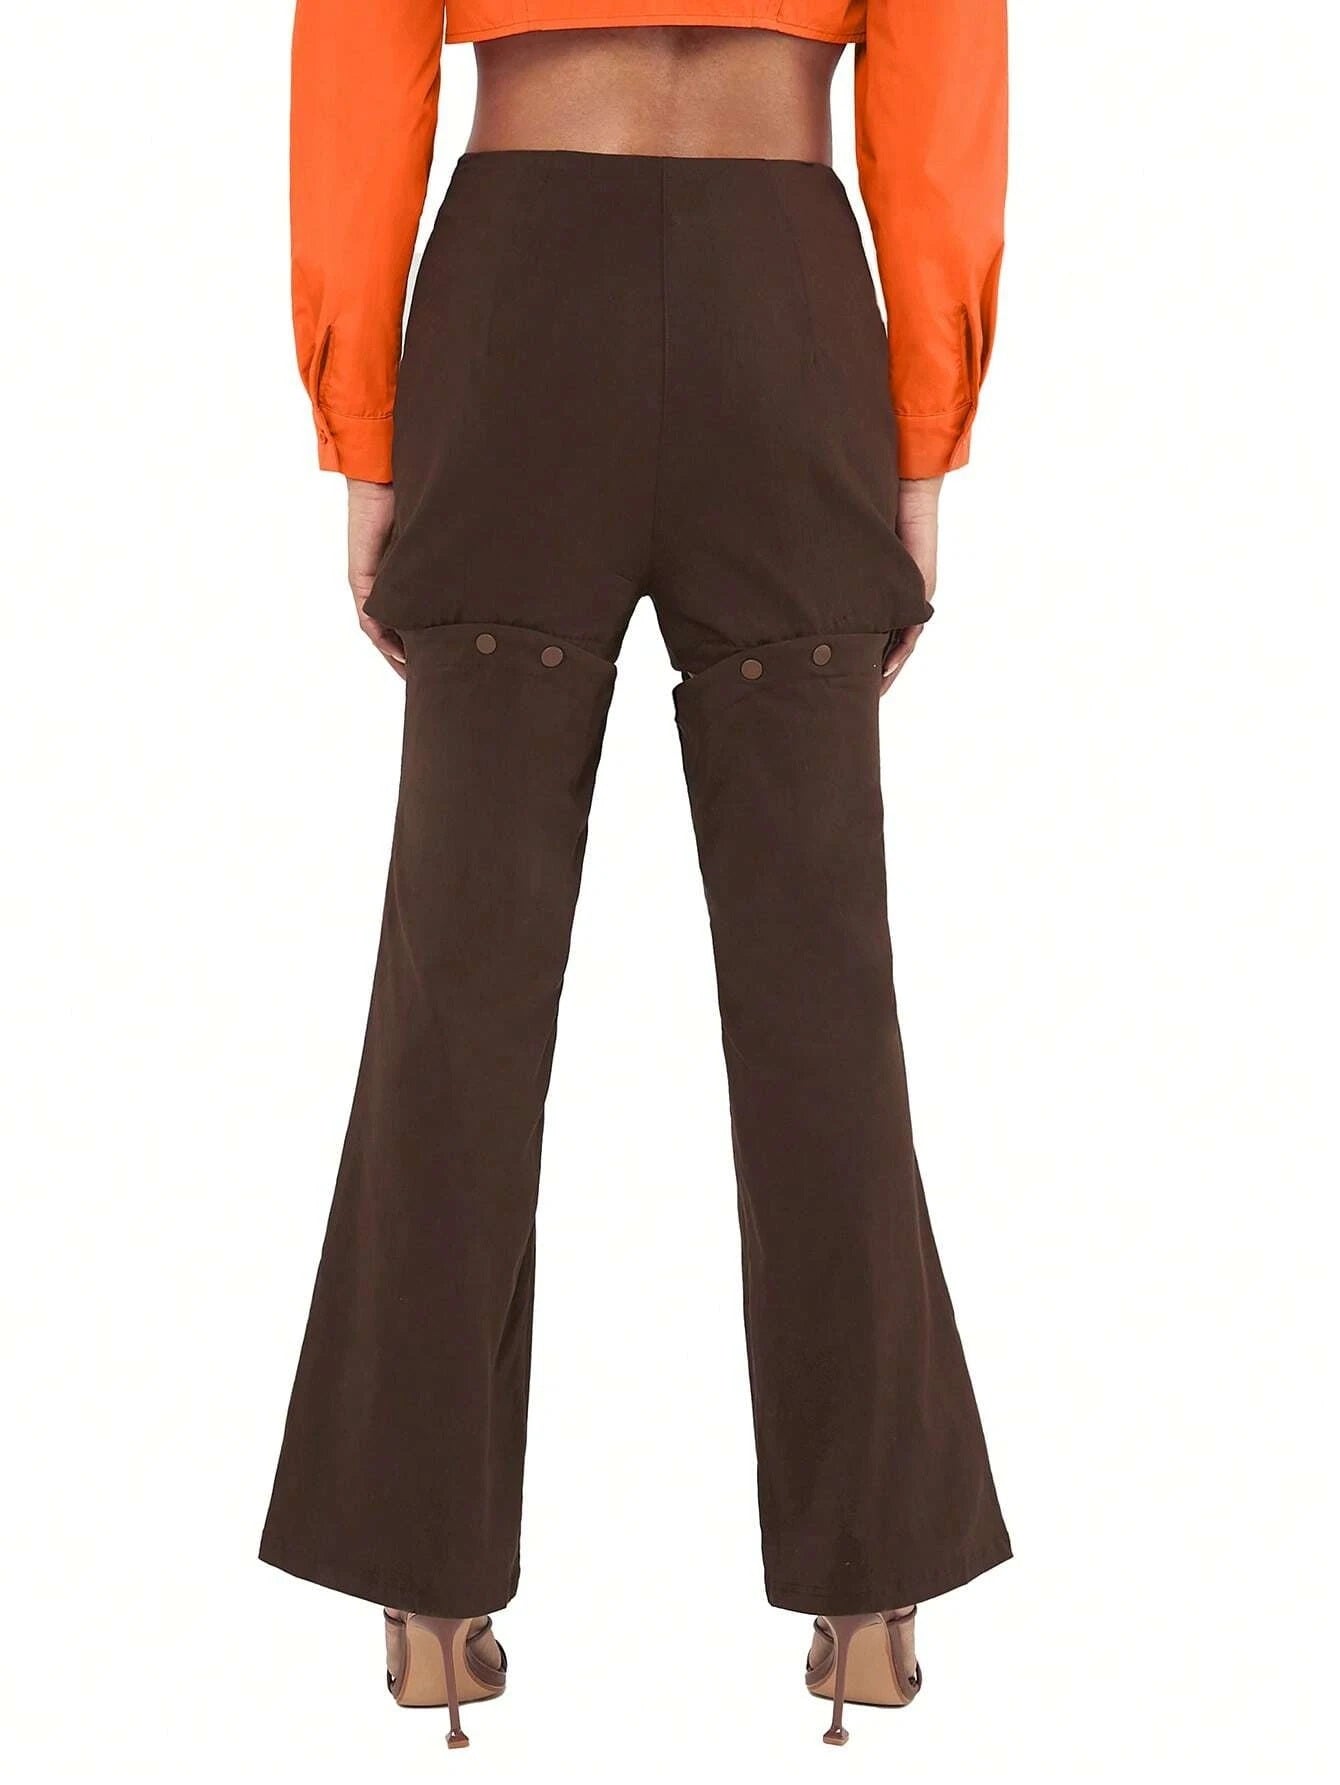 CM-BS644649 Women Casual Seoul Style Solid Button Detail Flare Leg Pants - Chocolate Brown